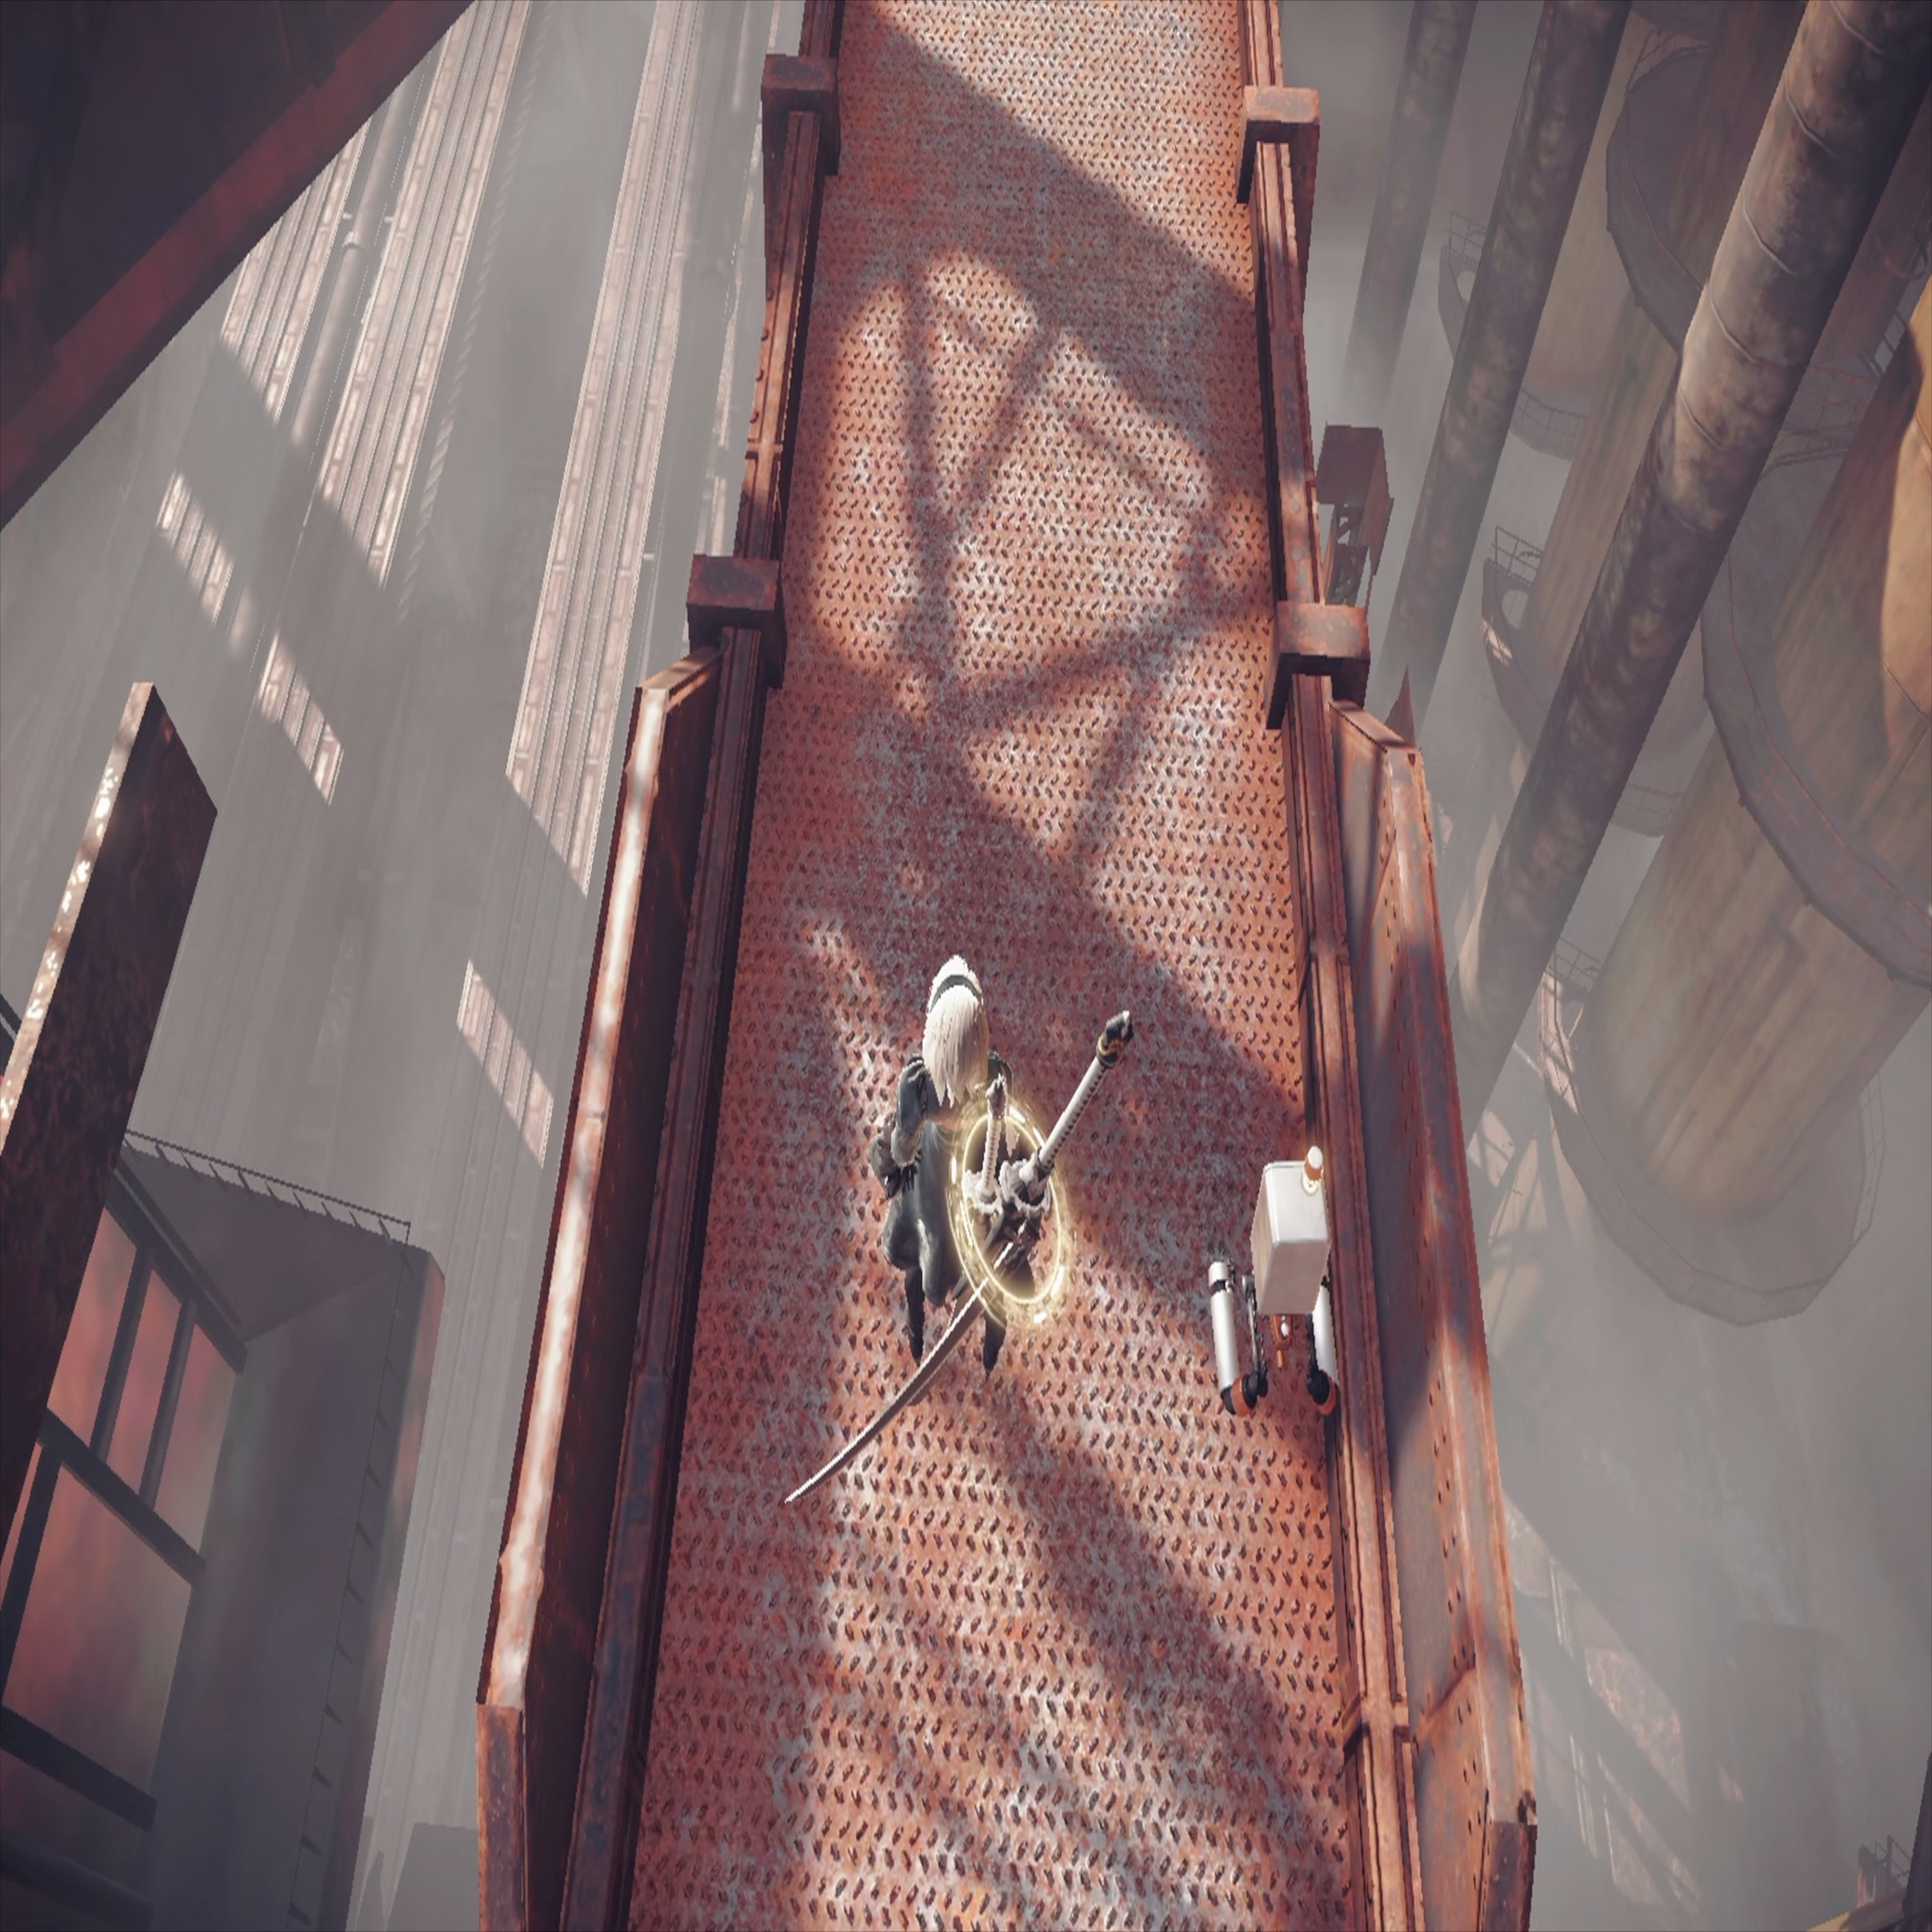 Nier Automata's Switch port is very impressive - but not quite perfect